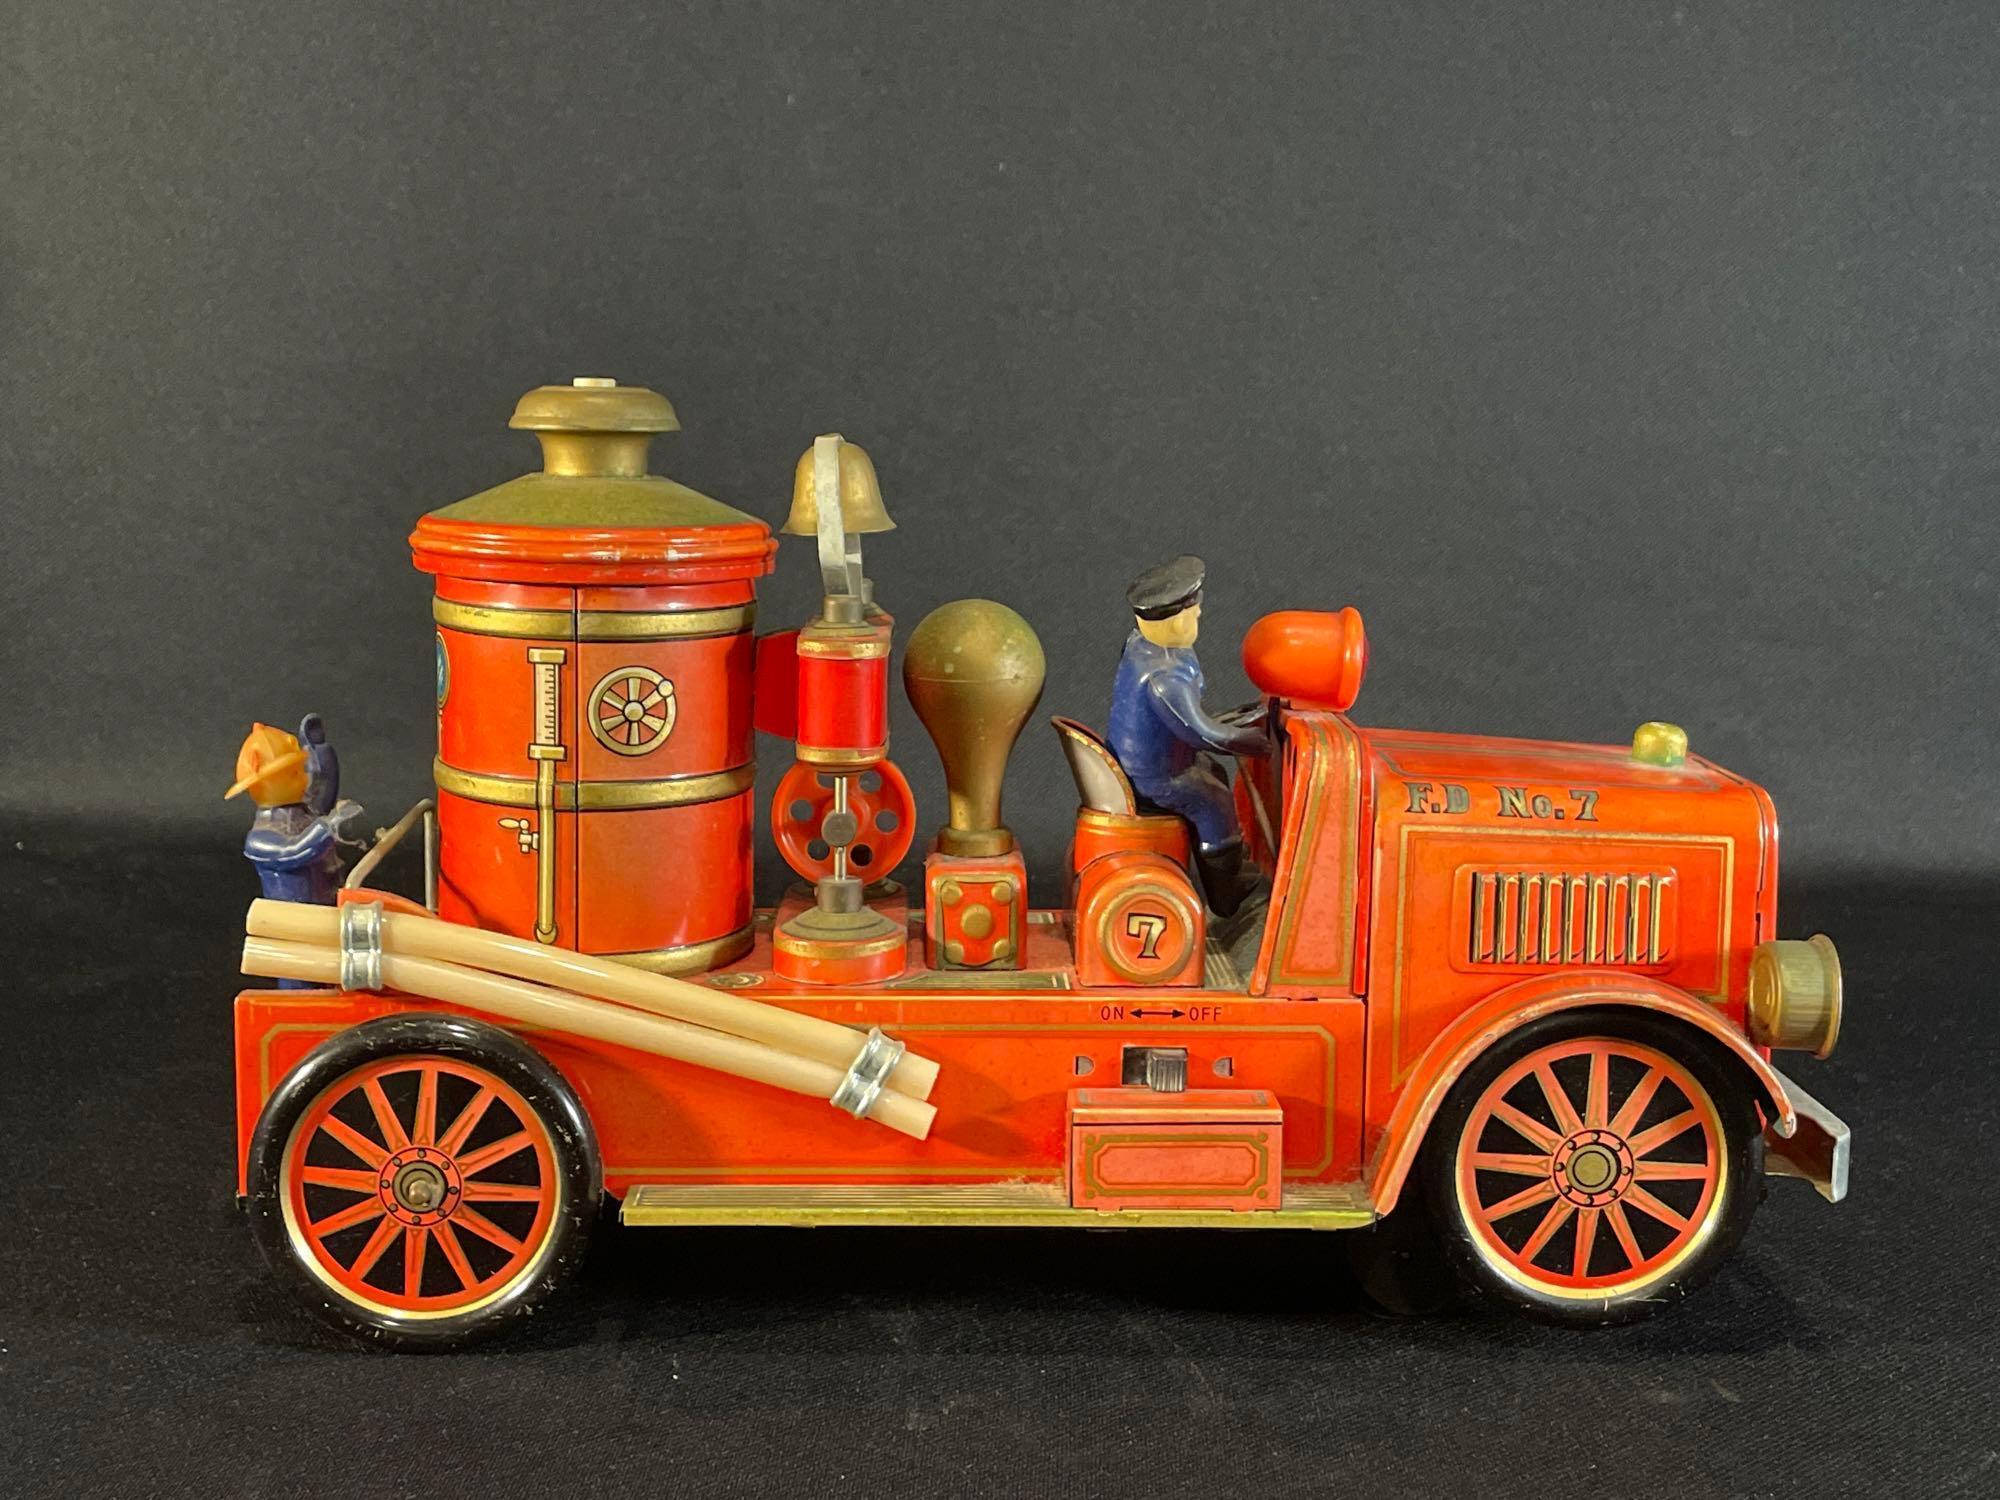 Modern Toys Japan, F.D No. 7 Tin Battery Operated Fire Truck